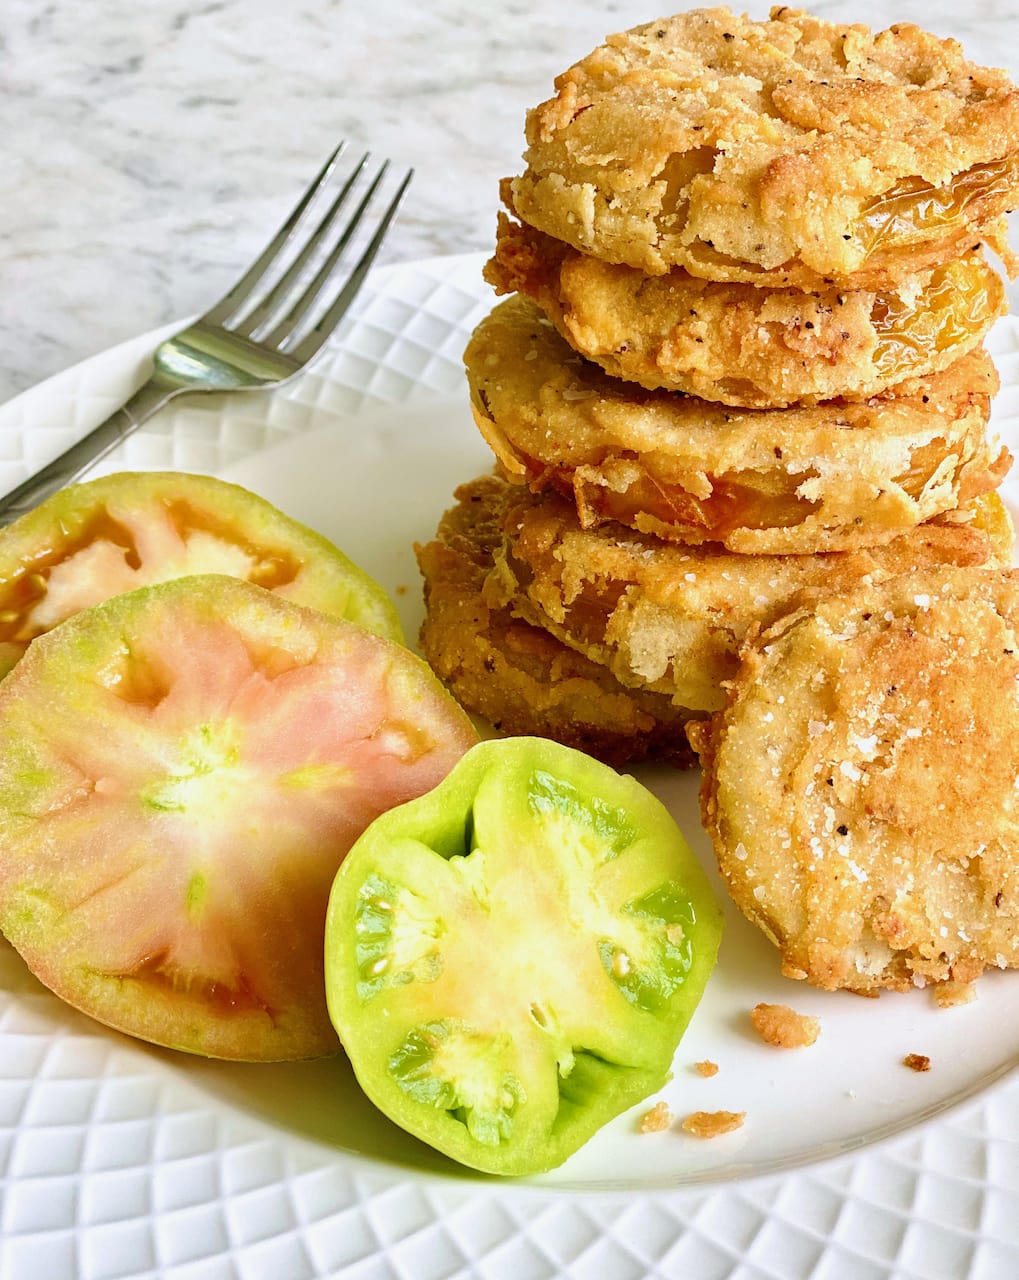 Fried-green-tomatoes